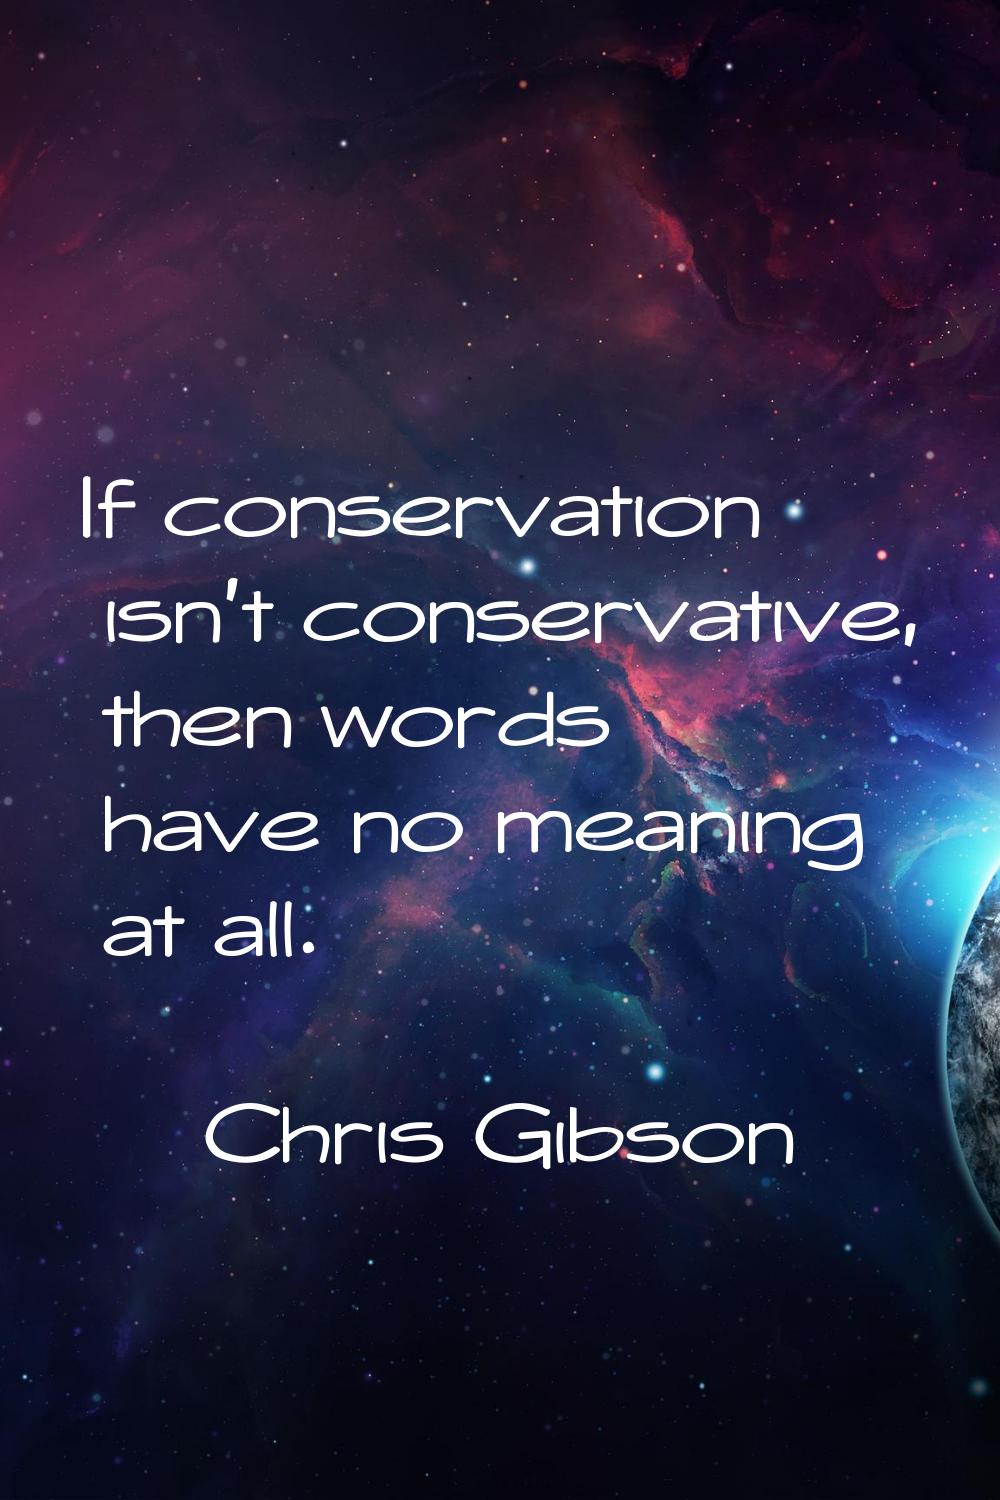 If conservation isn't conservative, then words have no meaning at all.